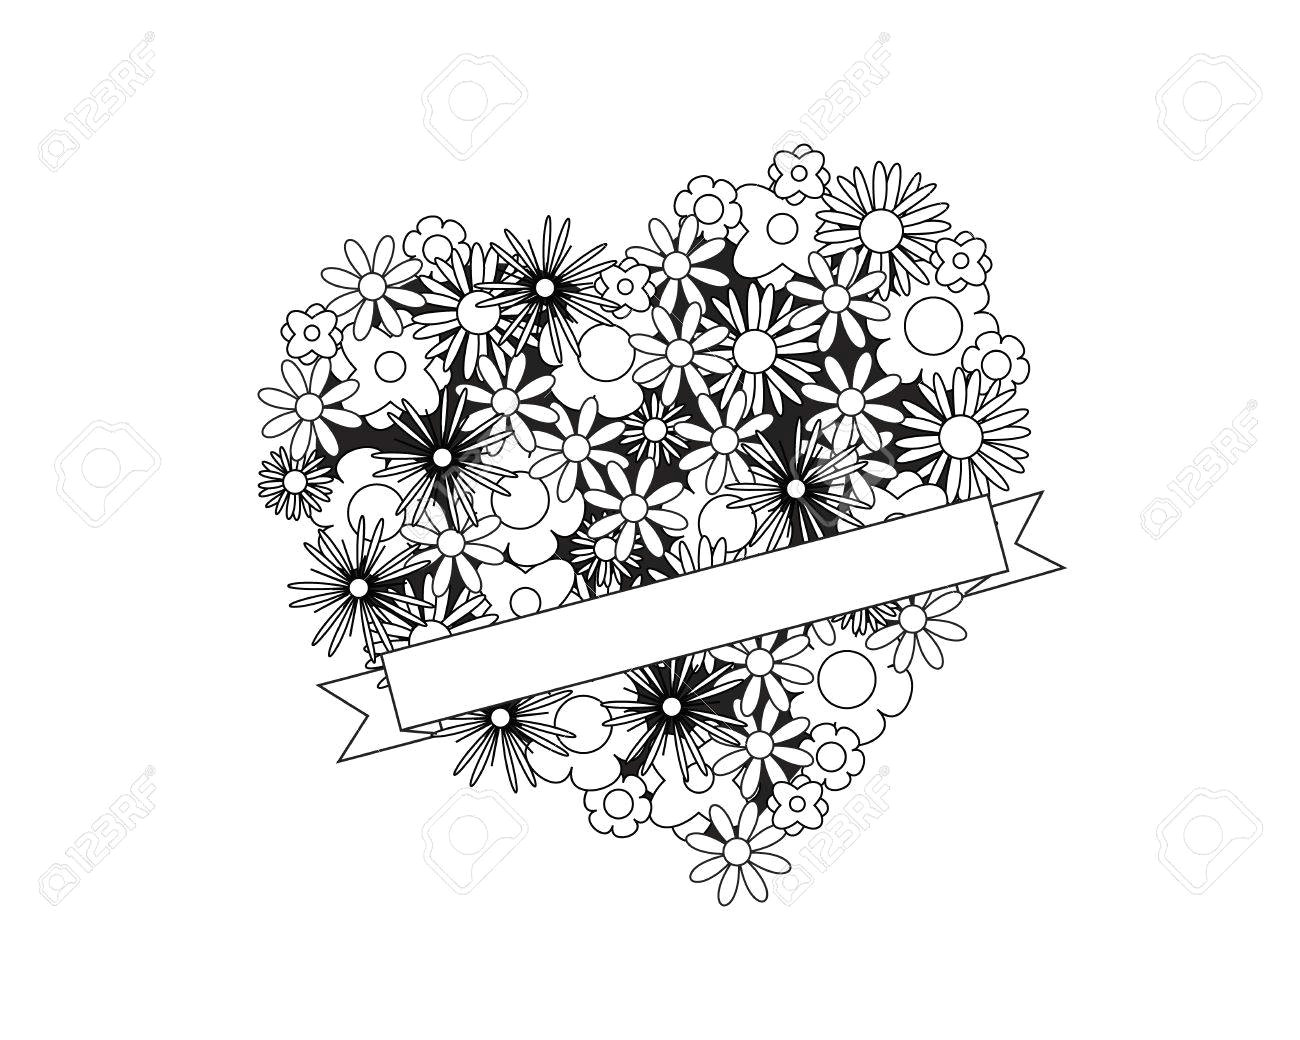 coloring page for adult od kids simple floral heart with ribbon place for your